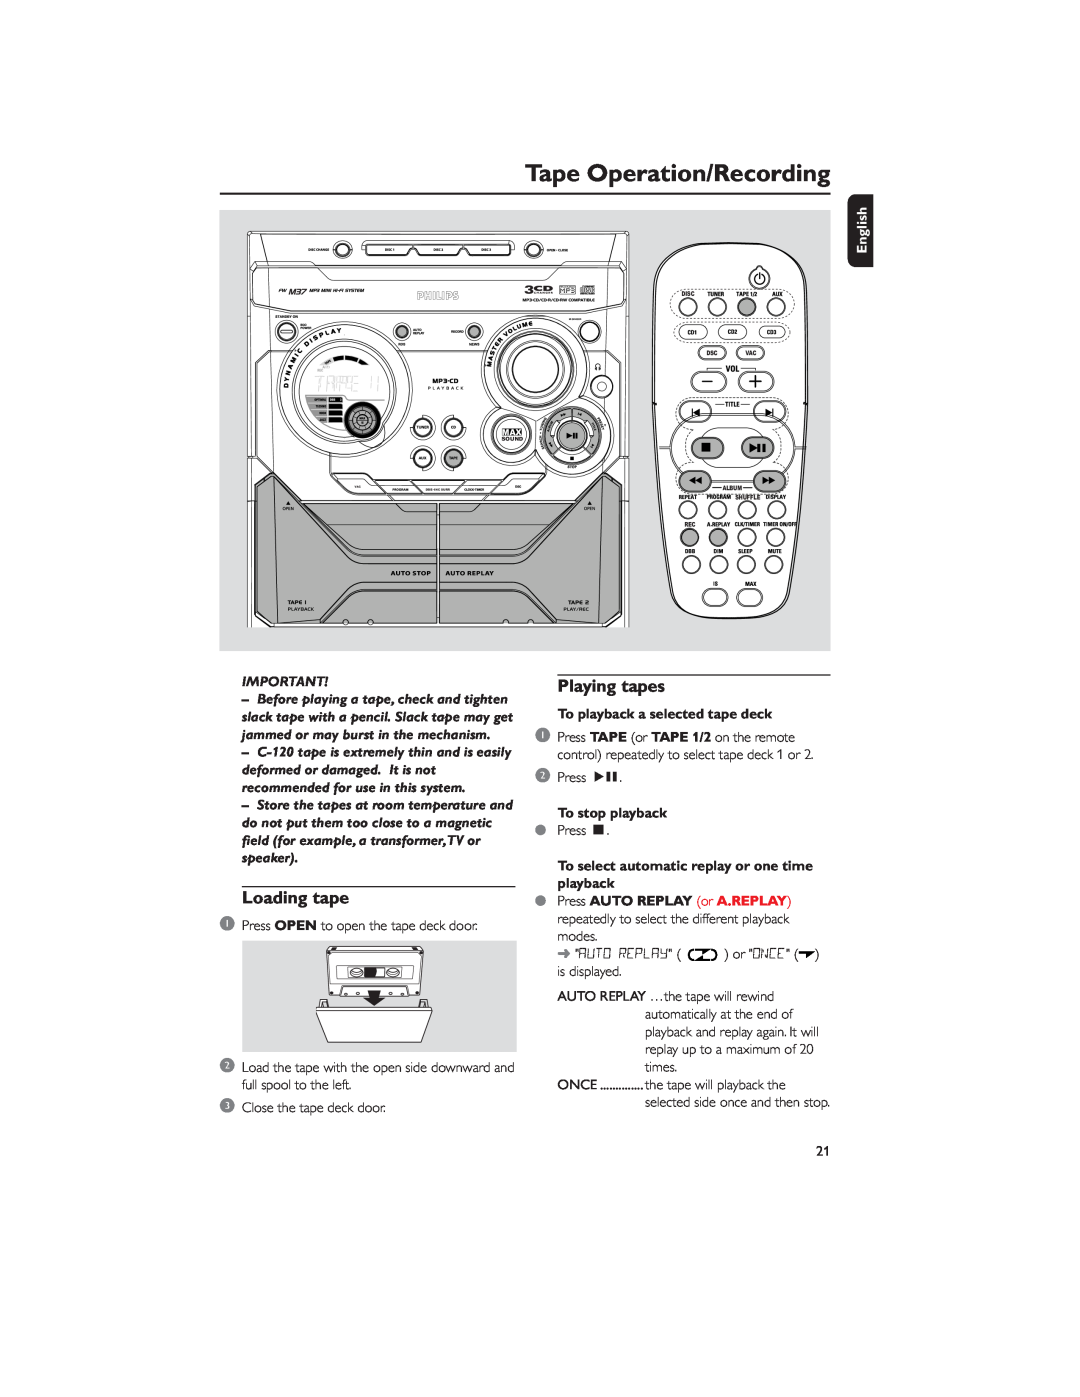 Philips MP3-CD user manual Tape Operation/Recording, Loading tape, Playing tapes, To playback a selected tape deck, English 